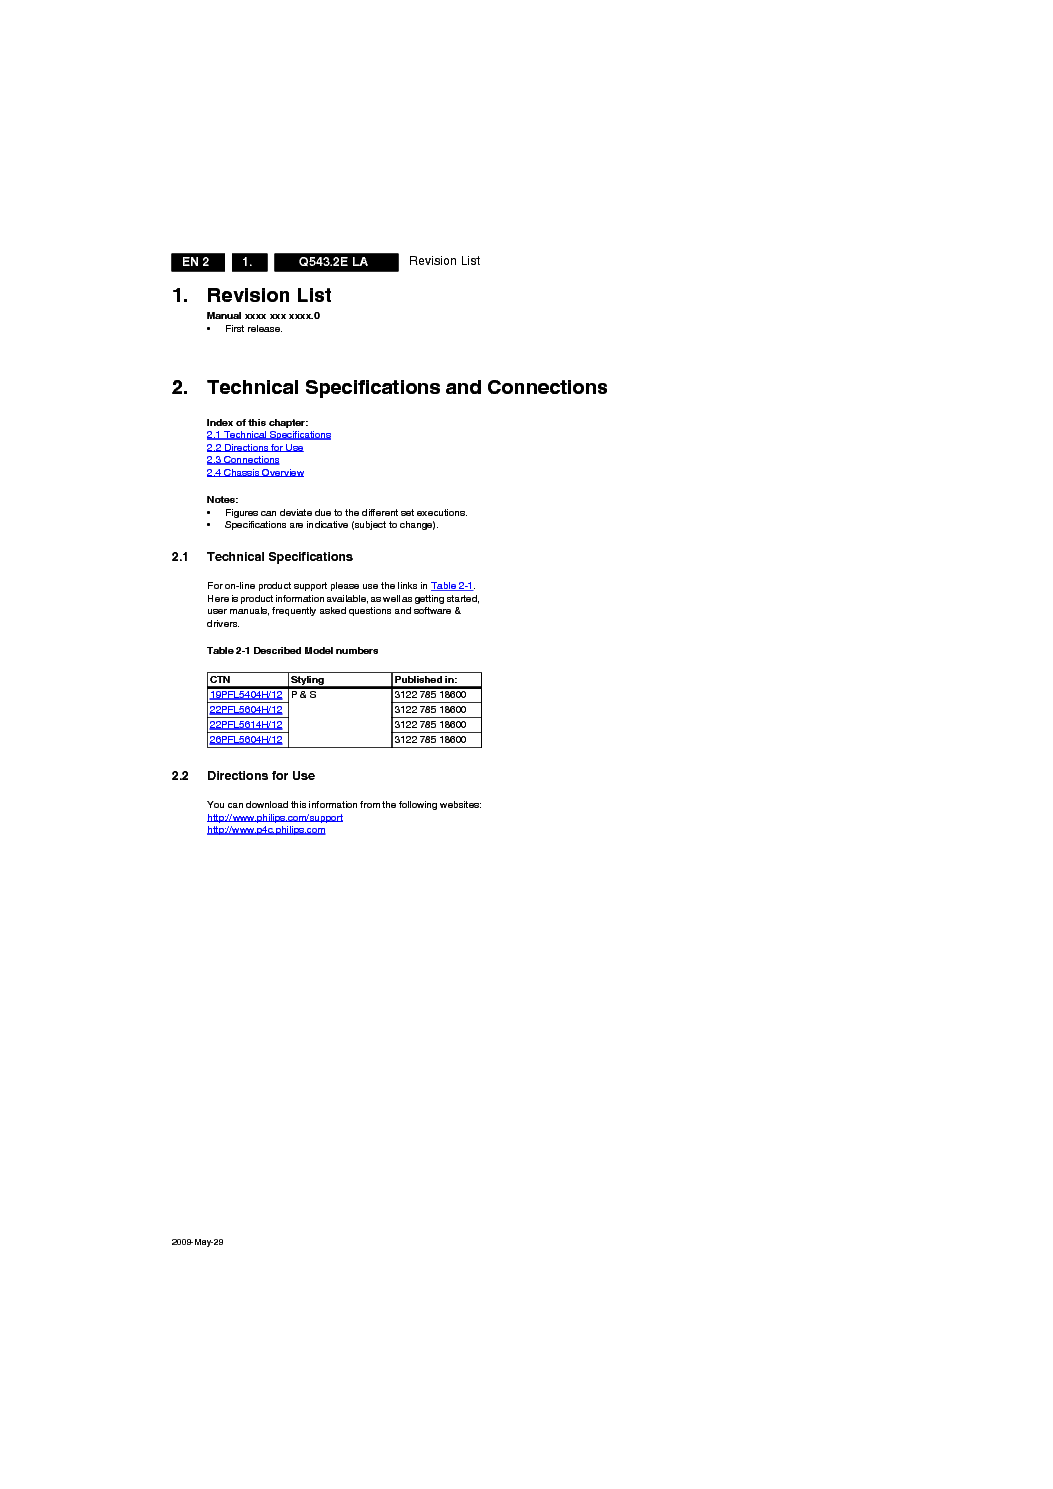 PHILIPS Q543.2E LA CHASSIS LCD service manual (2nd page)